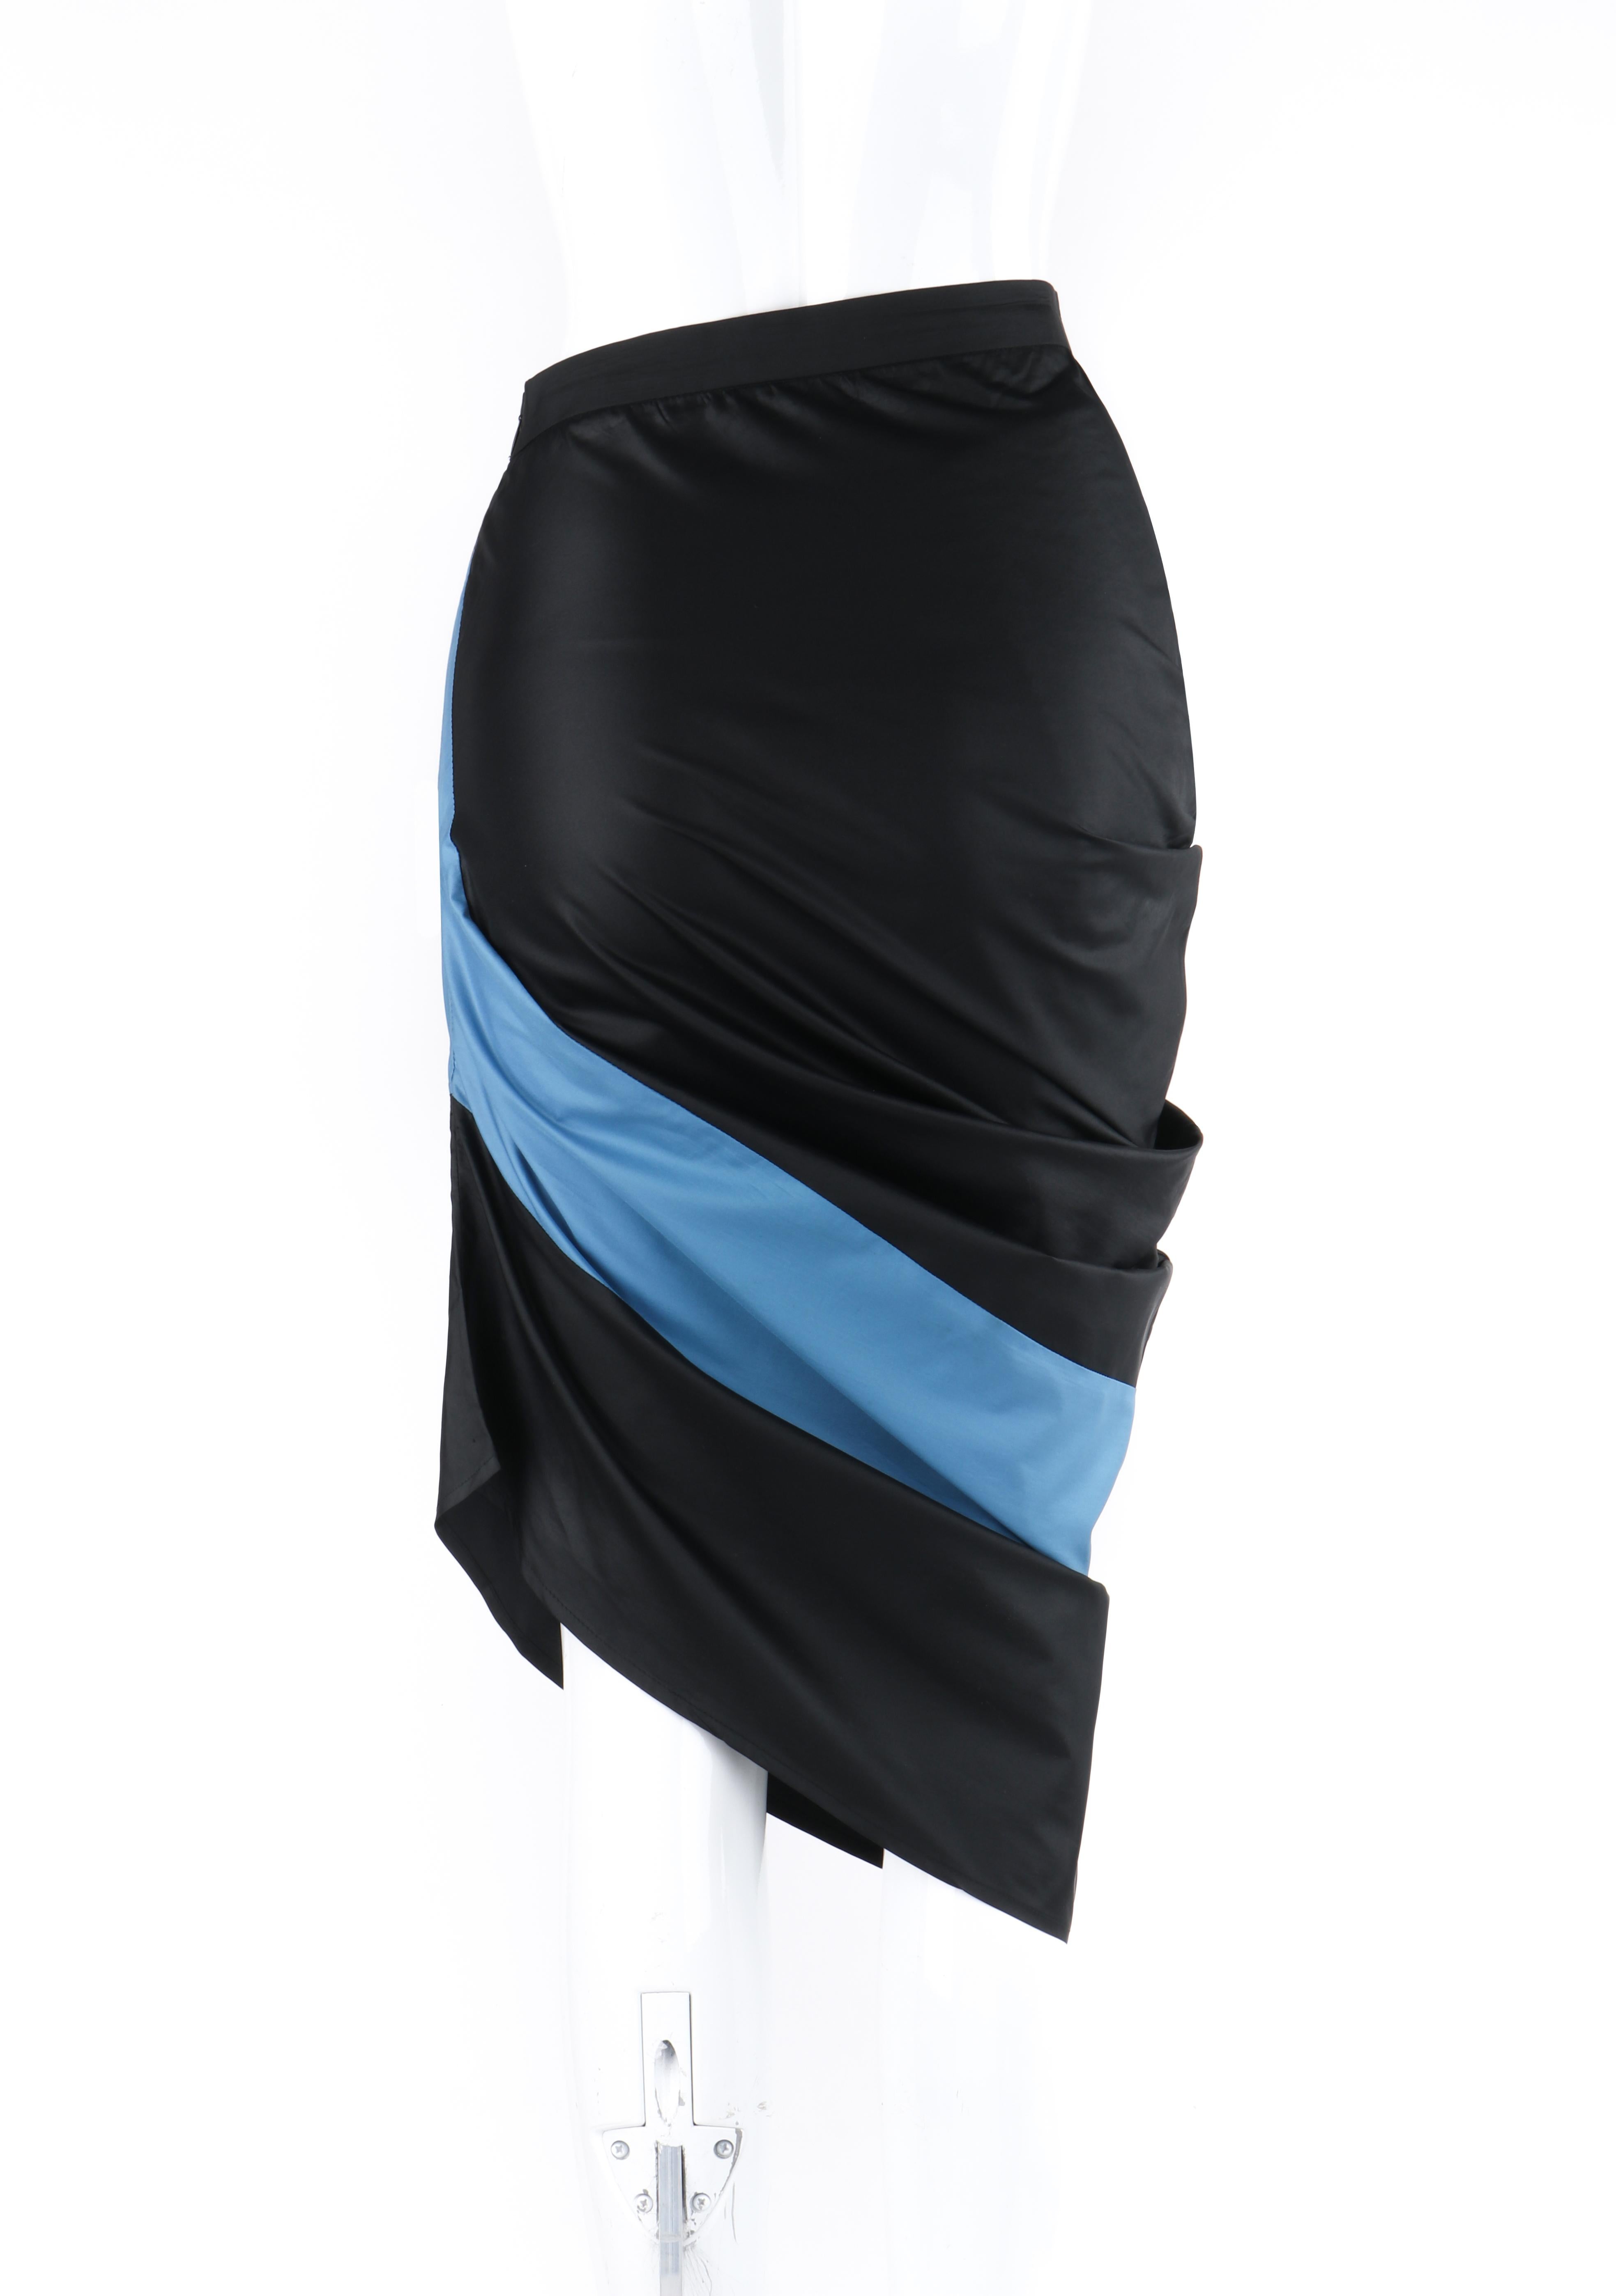 ALEXANDER McQUEEN A/W 1997 Color Blocked Asymmetrical Ruched Pencil Skirt In Good Condition For Sale In Thiensville, WI